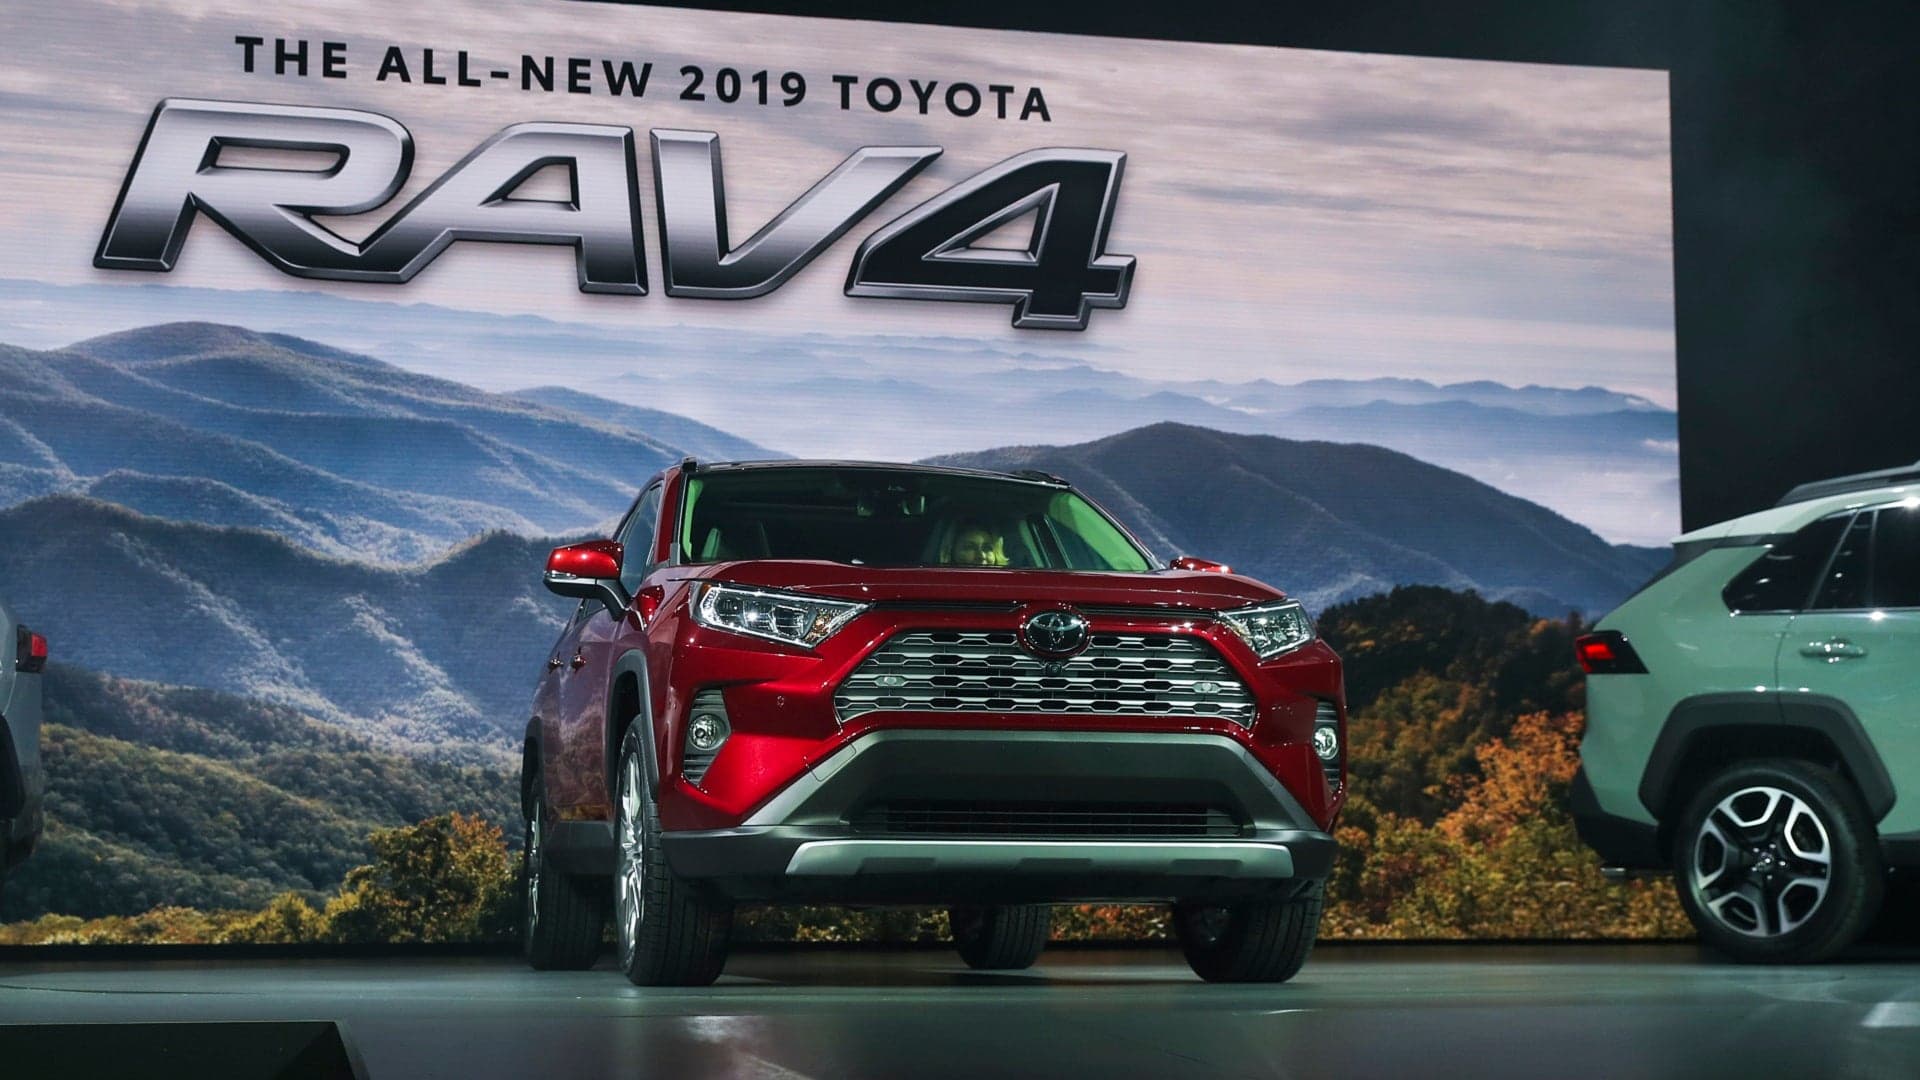 Toyota Plans to Spend $1.1B on Two Ontario RAV4 Plants, Sources Say